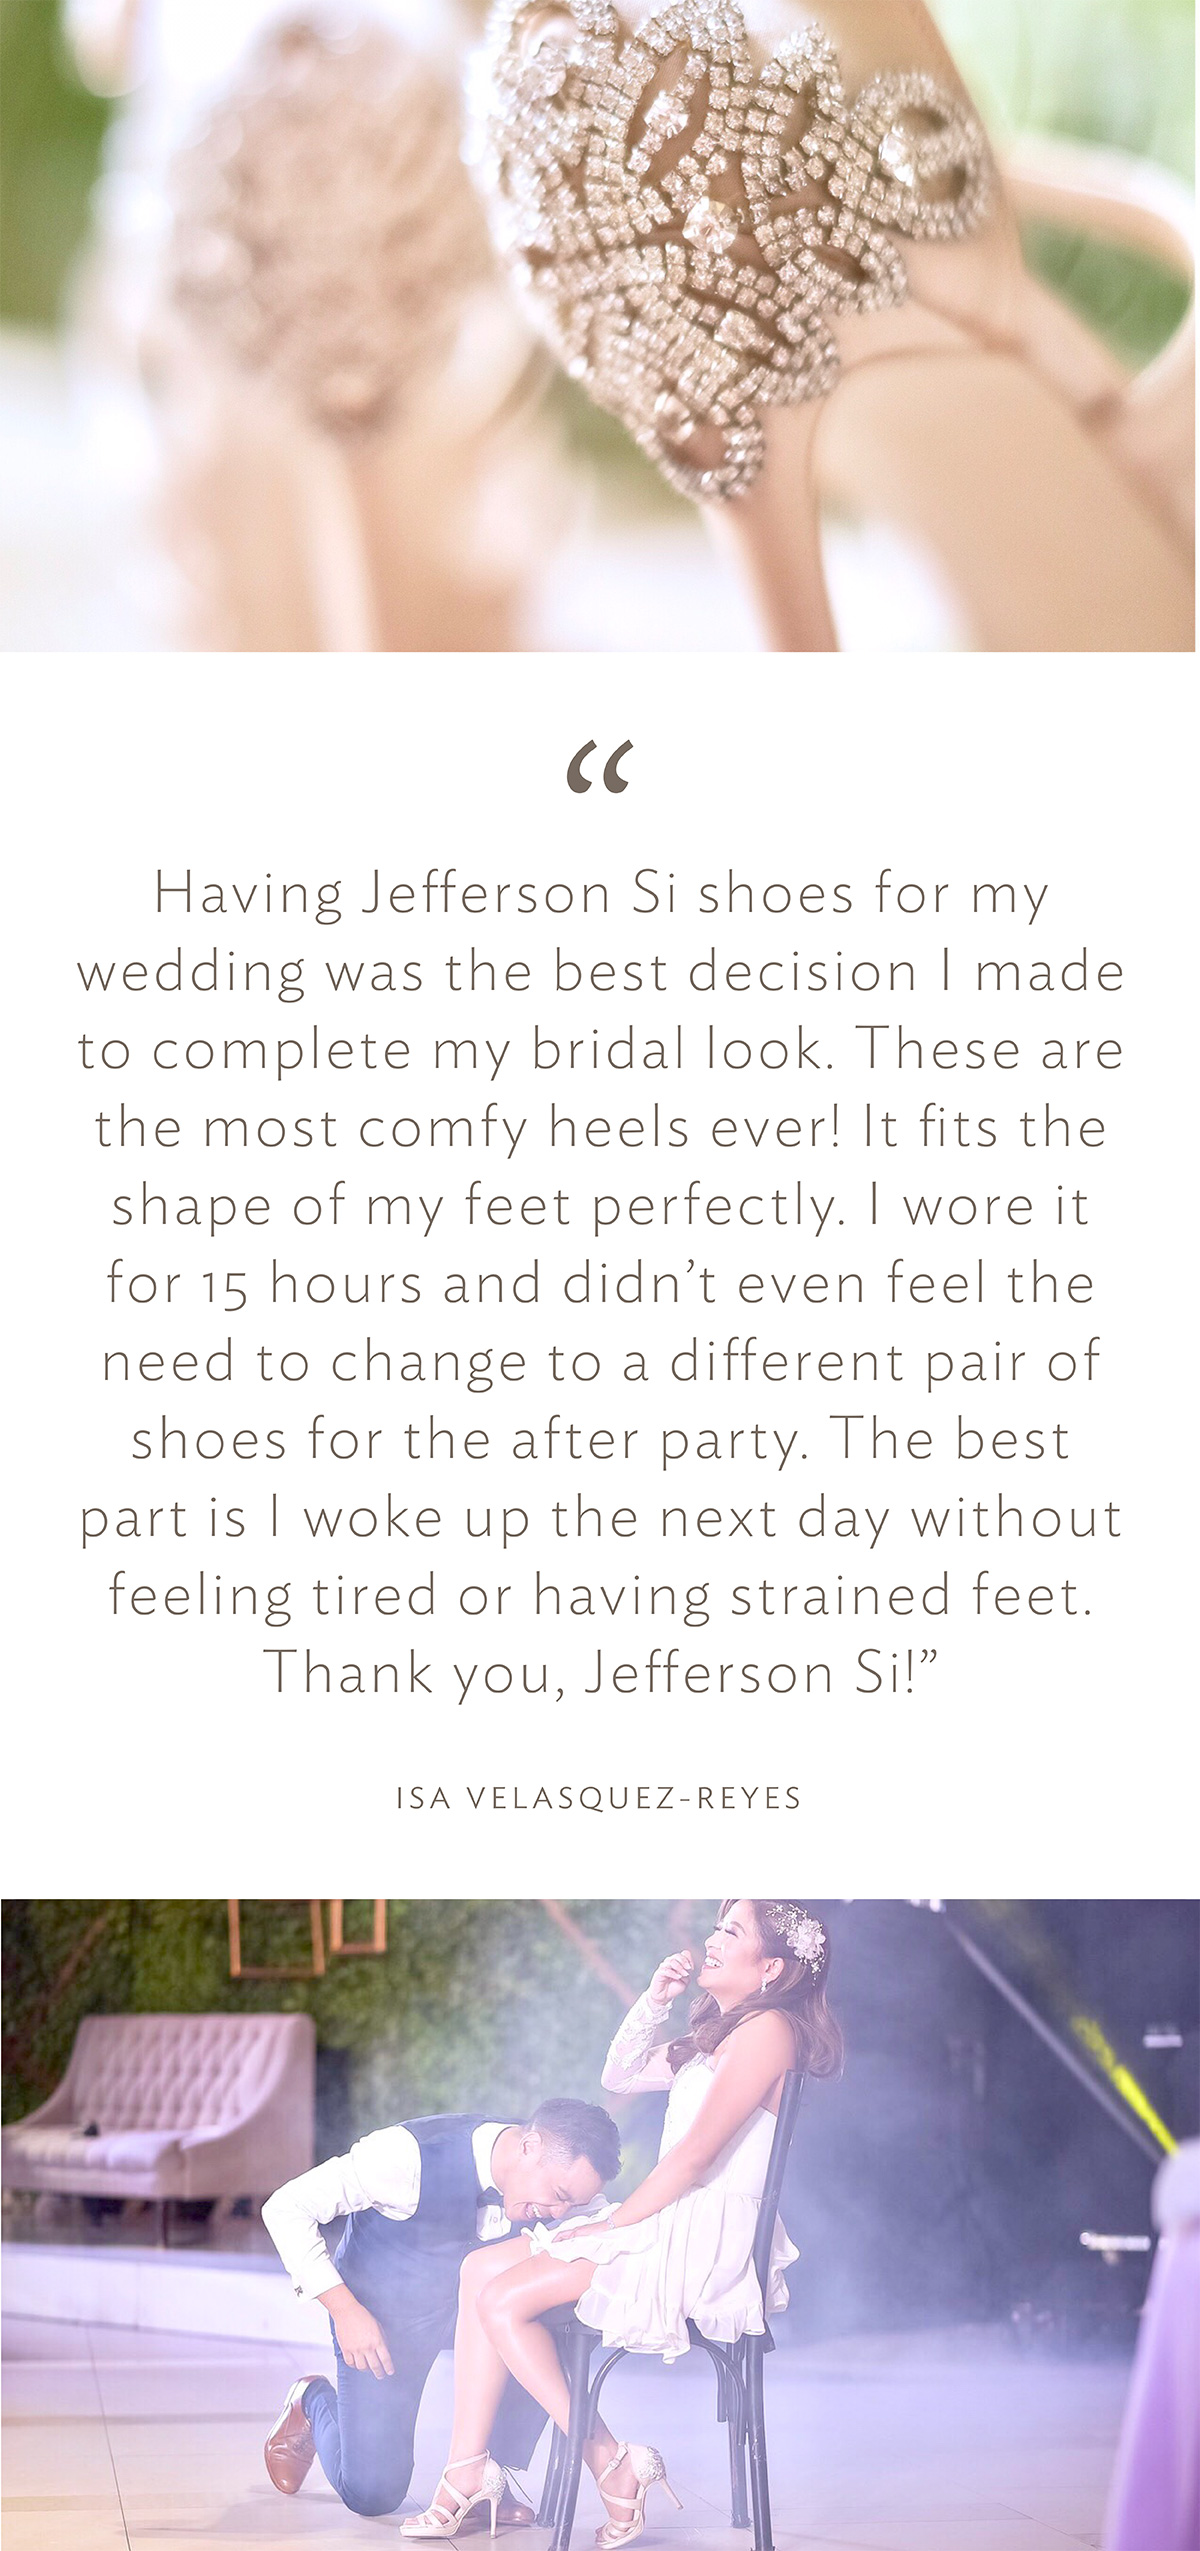 “Having Jefferson Si shoes for my wedding was the best decision I made to complete my bridal look. These are the most comfy heels ever! It fits the shape of my feet perfectly. I wore it for 15 hours and didn’t even feel the need to change to a different pair of shoes for the after party. The best part is I woke up the next day without feeling tired or having strained feet. Thank you, Jefferson Si!” (Issa Velasquez-Reyes)